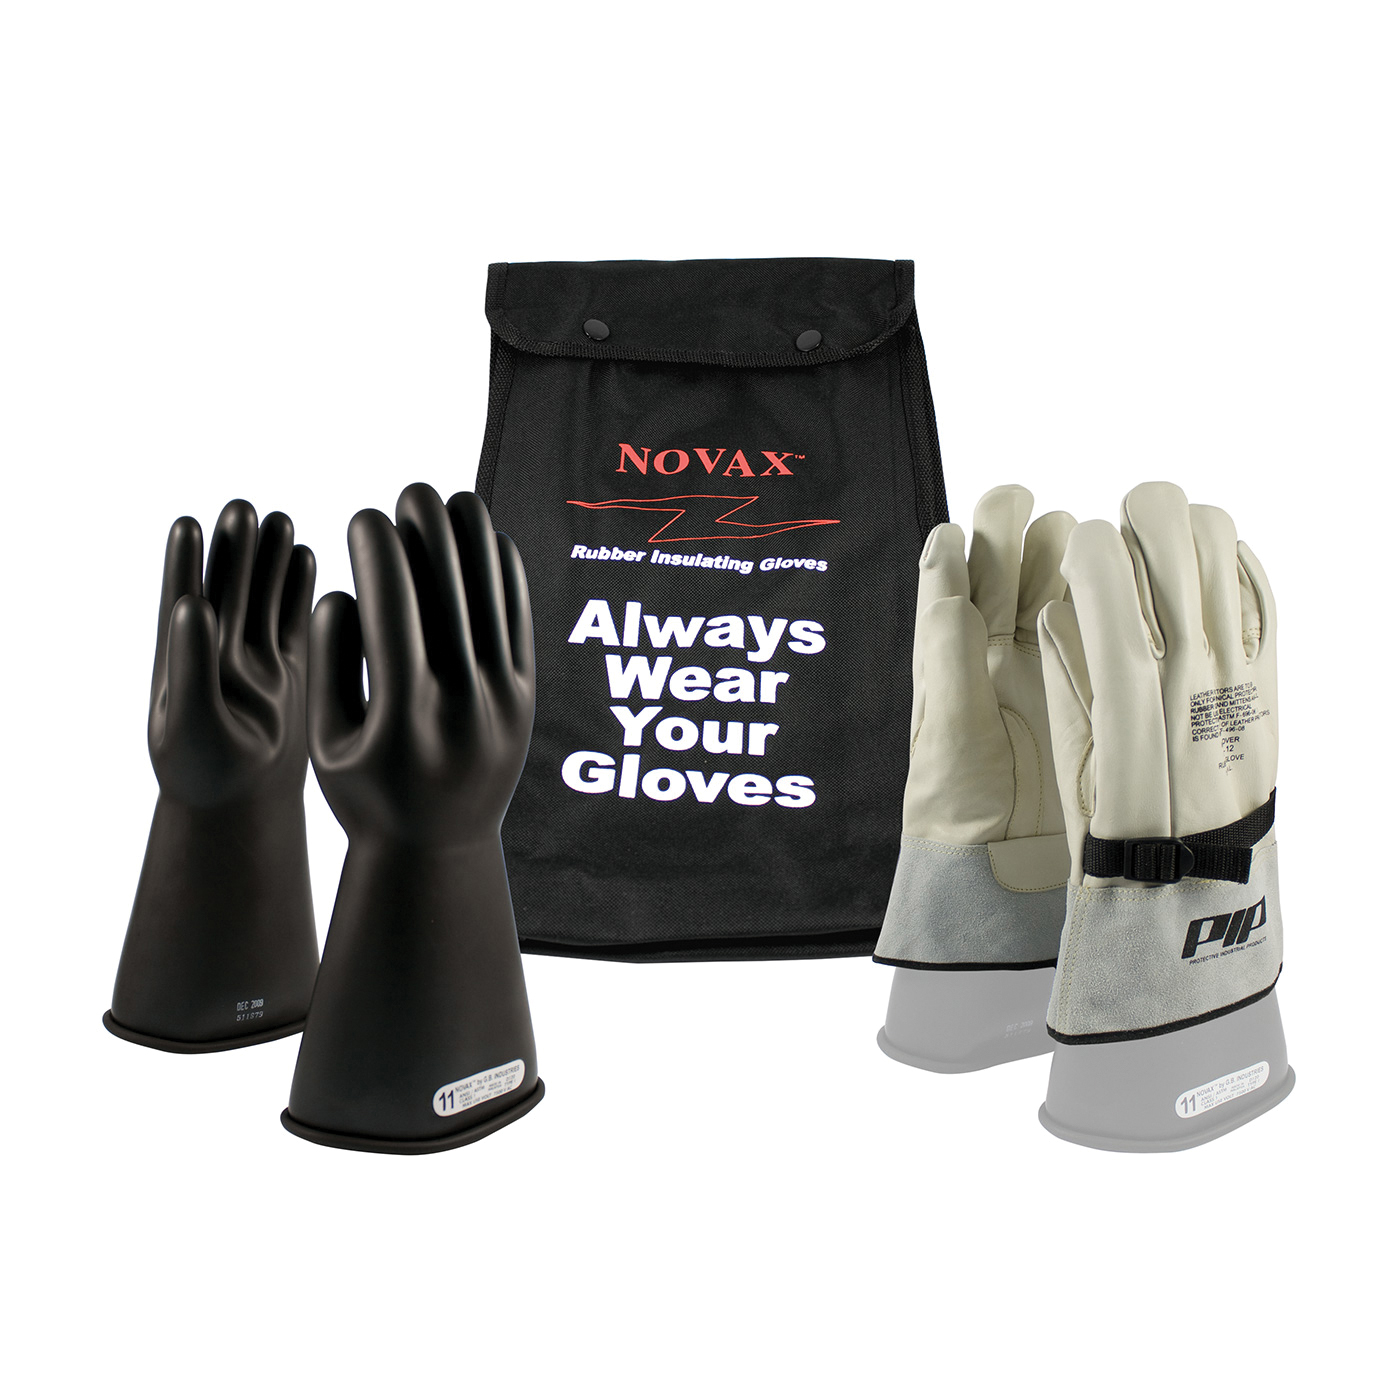 Novax® 150-SK-1/12-KIT Insulating Unisex Electrical Safety Gloves Kit, SZ 12, Cowhide Leather/Natural Rubber, Black/Natural, 14 in L, ASTM Class: Class 1, 7500 VAC, 11250 VDC Max Use Voltage